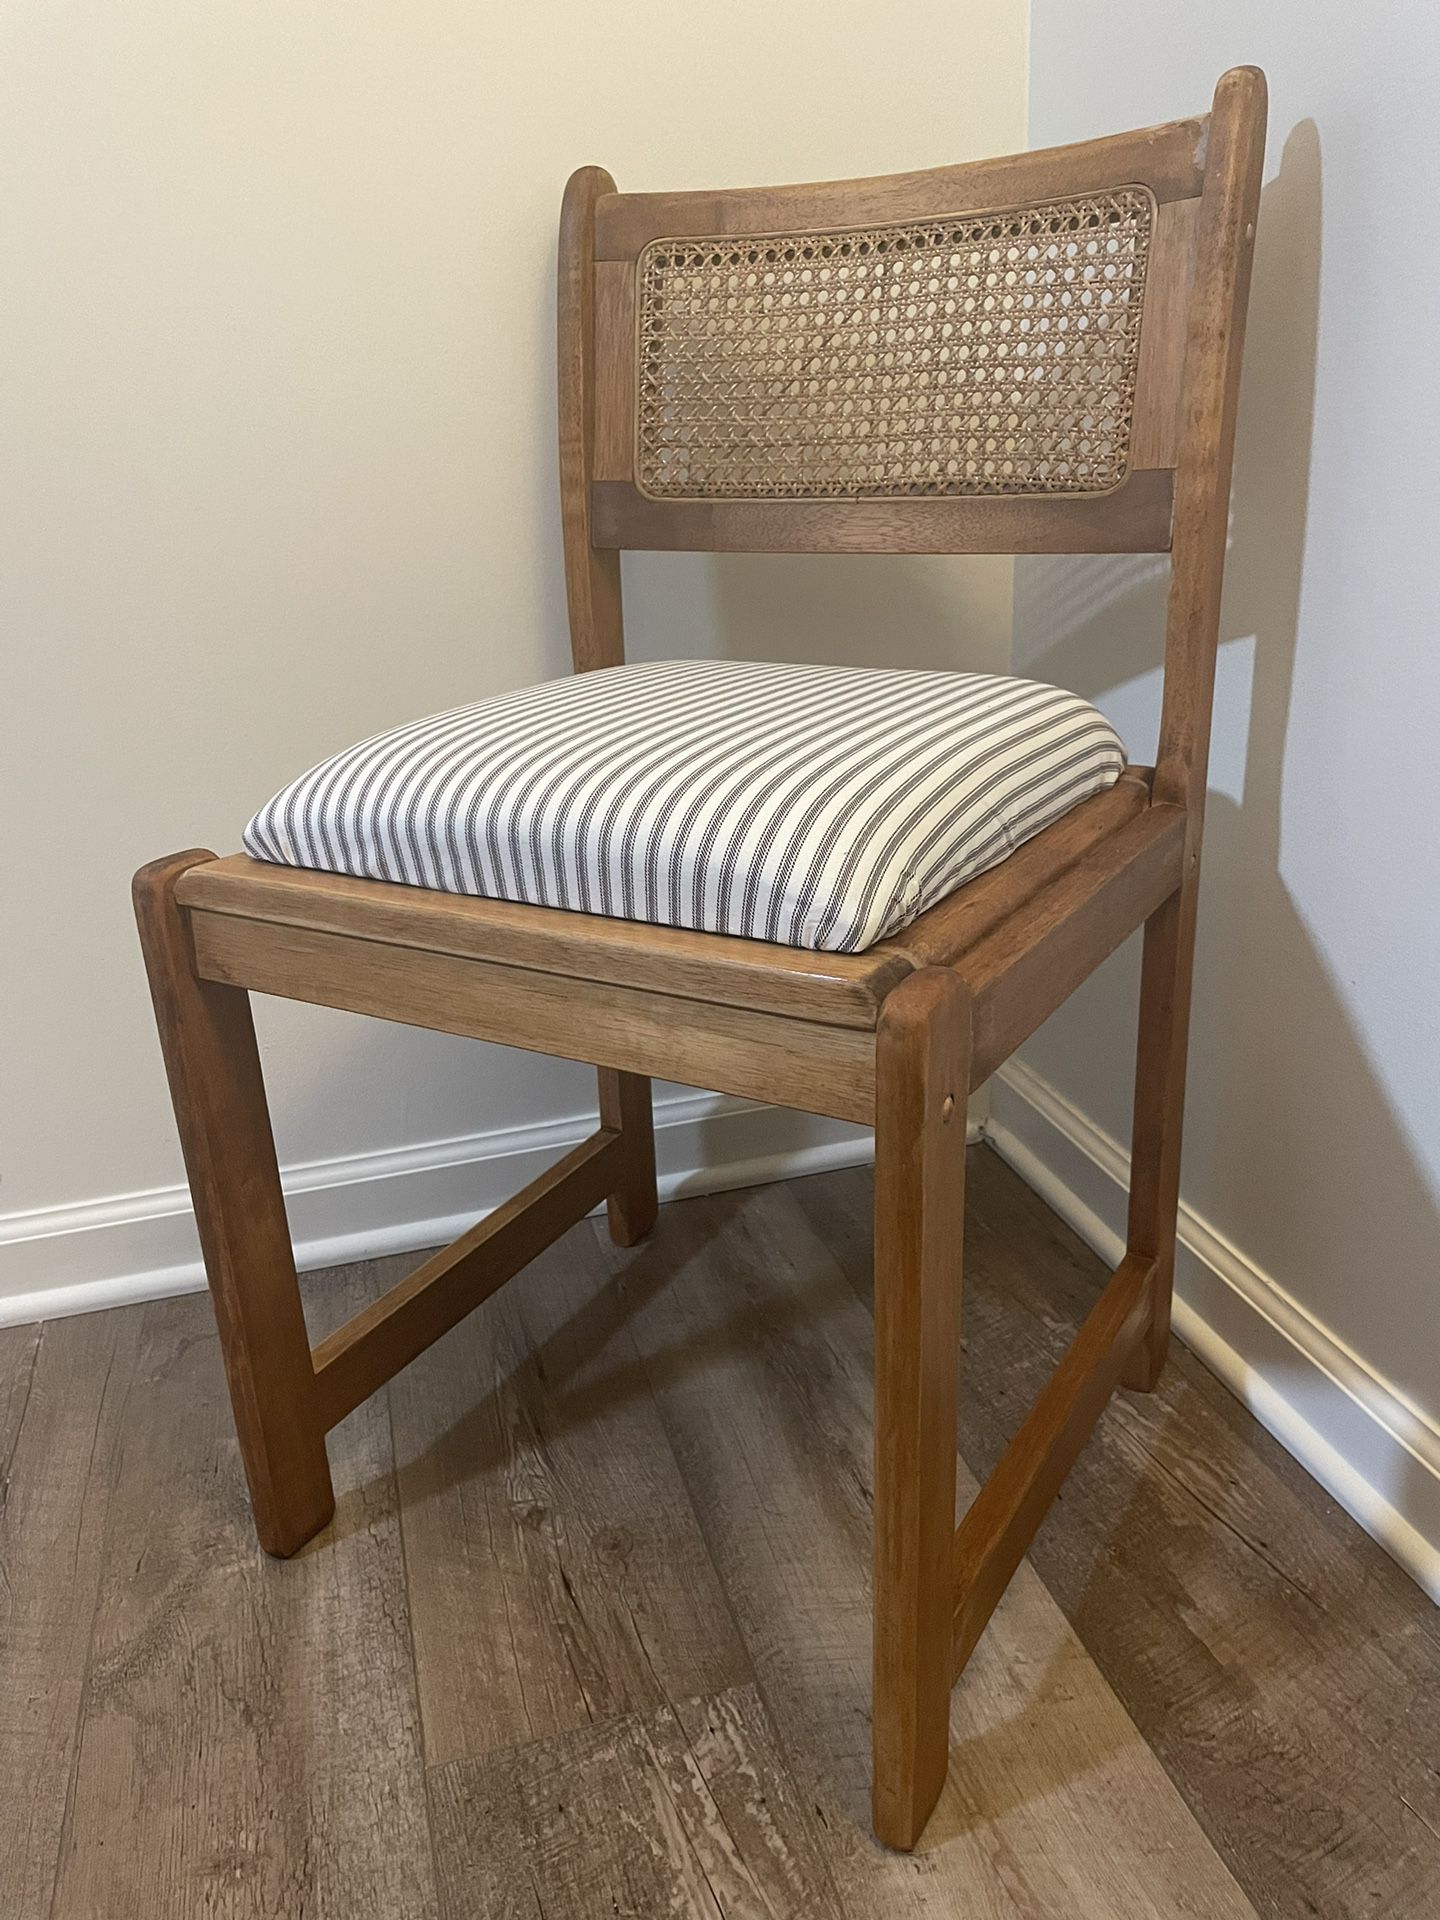 Restored Vintage Brown Oak Chair with Cane